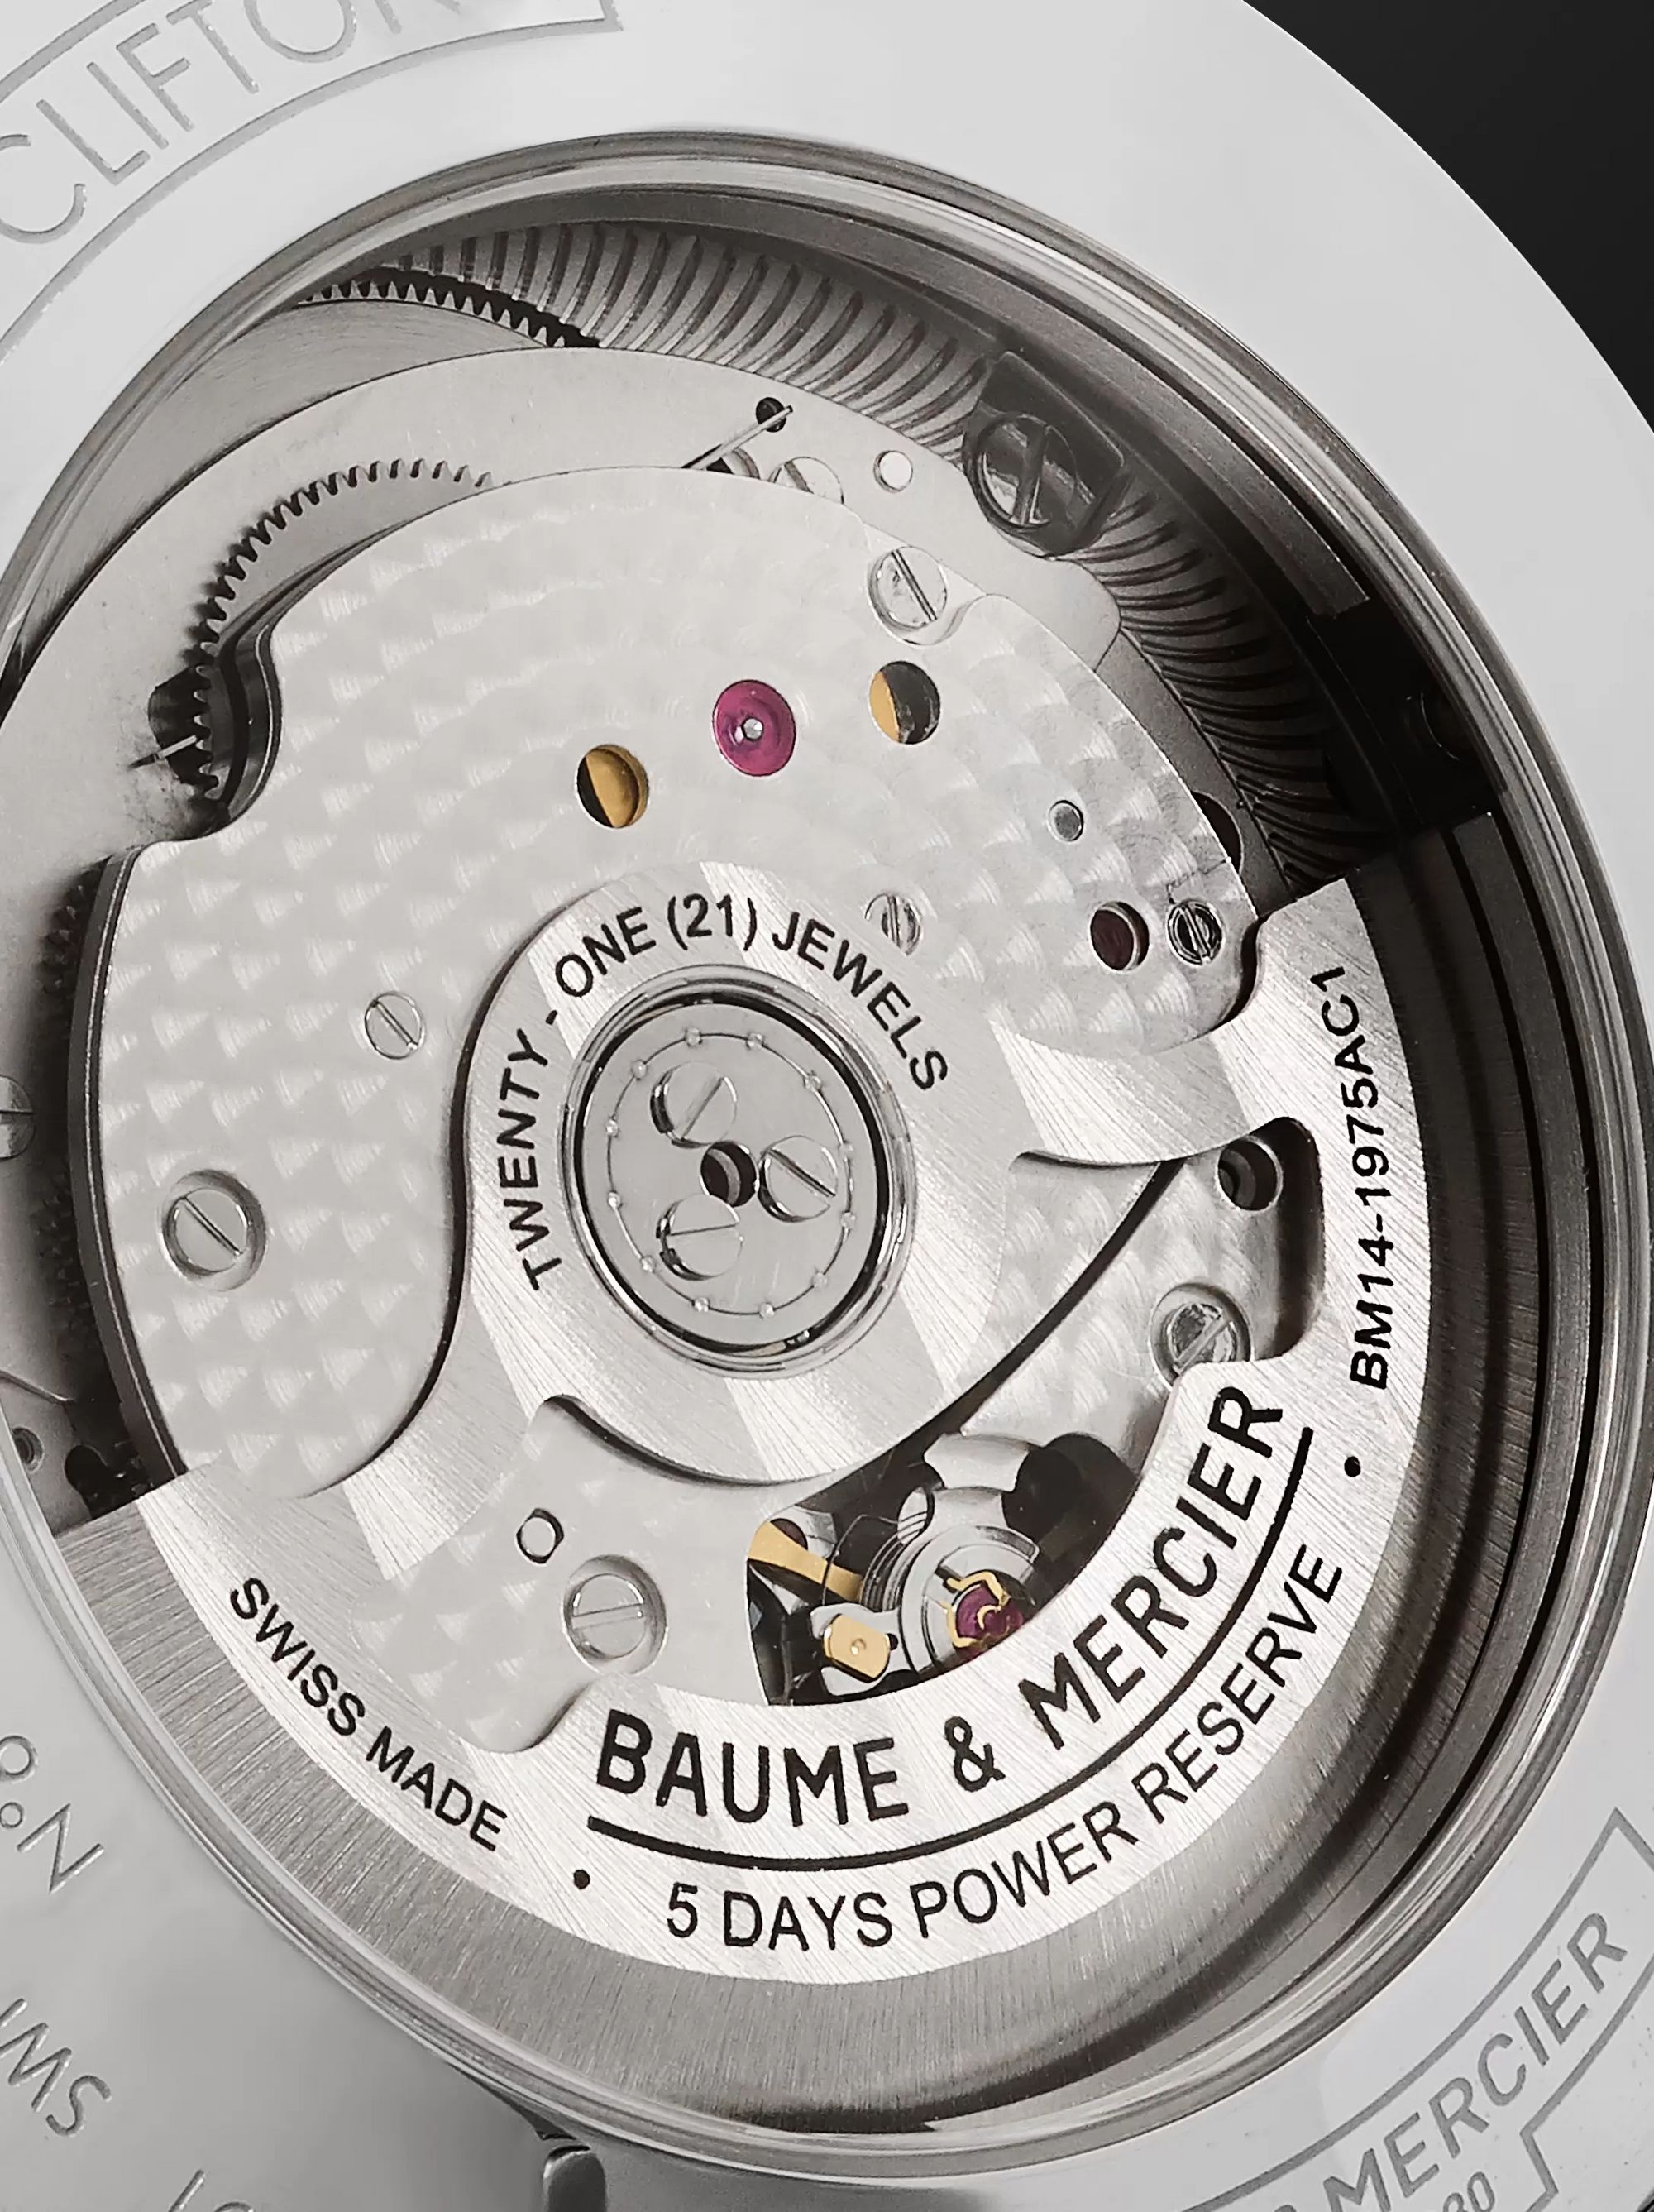 BAUME & MERCIER Clifton Baumatic Automatic Moon-Phase 42mm Stainless Steel Watch, Ref. No. M0A10552